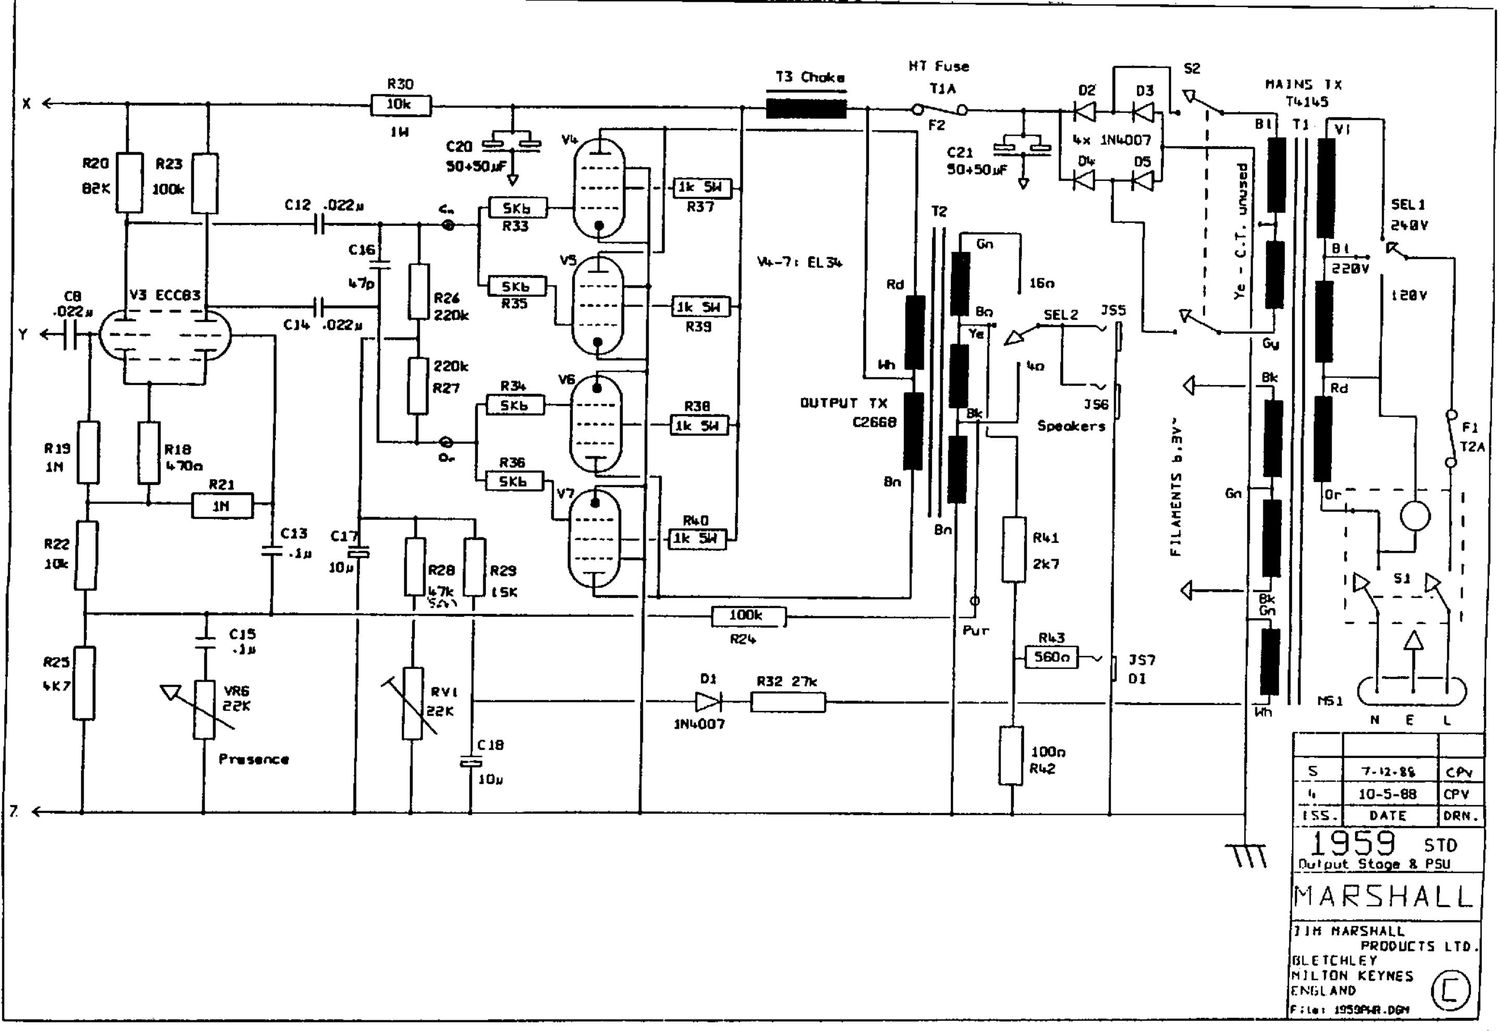 Marshall 1959 PWRM Schematic